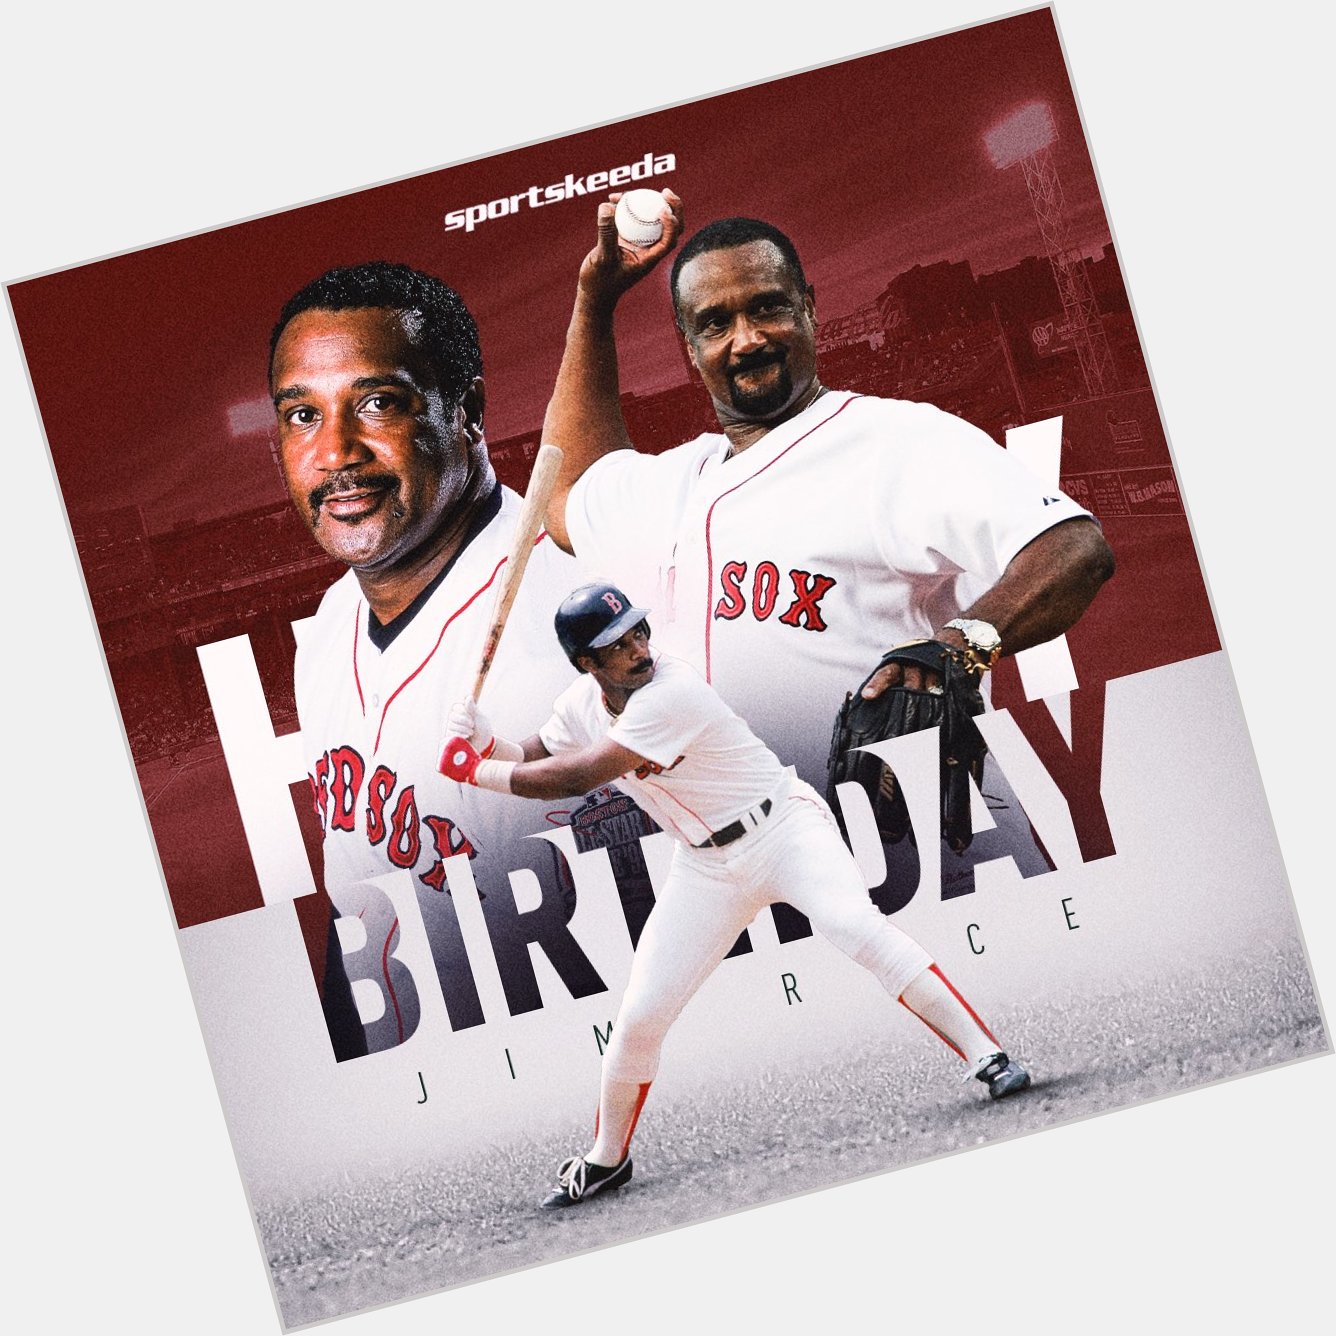 Happy Birthday to the legendary, Jim Rice!!     Hall of Fame MVP 8x All-Star 2x Silver Slugger 